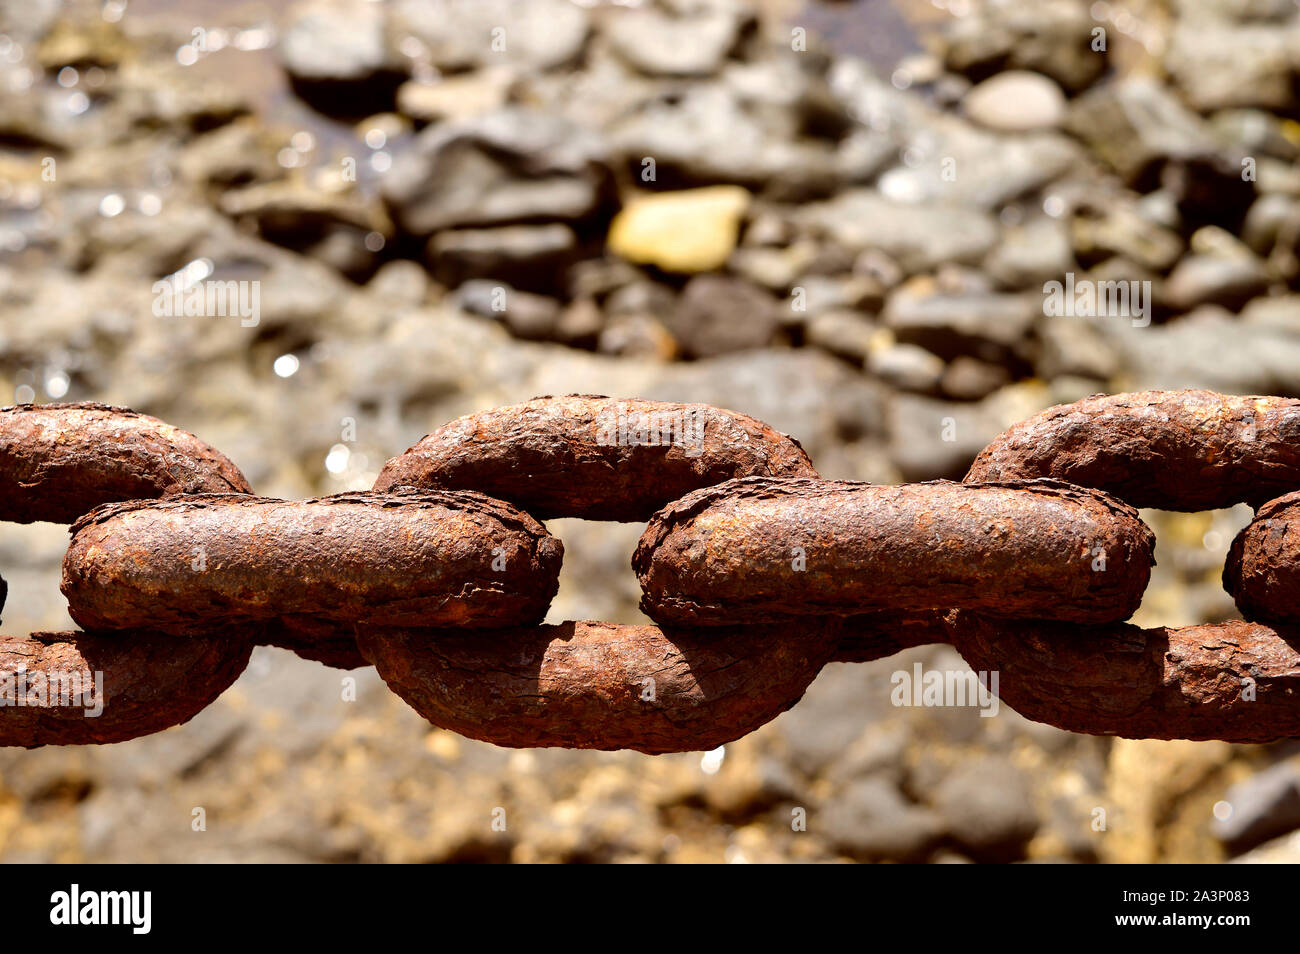 https://c8.alamy.com/comp/2A3P083/heavy-rust-on-the-links-of-a-chain-in-playa-blanca-lanzarote-2A3P083.jpg